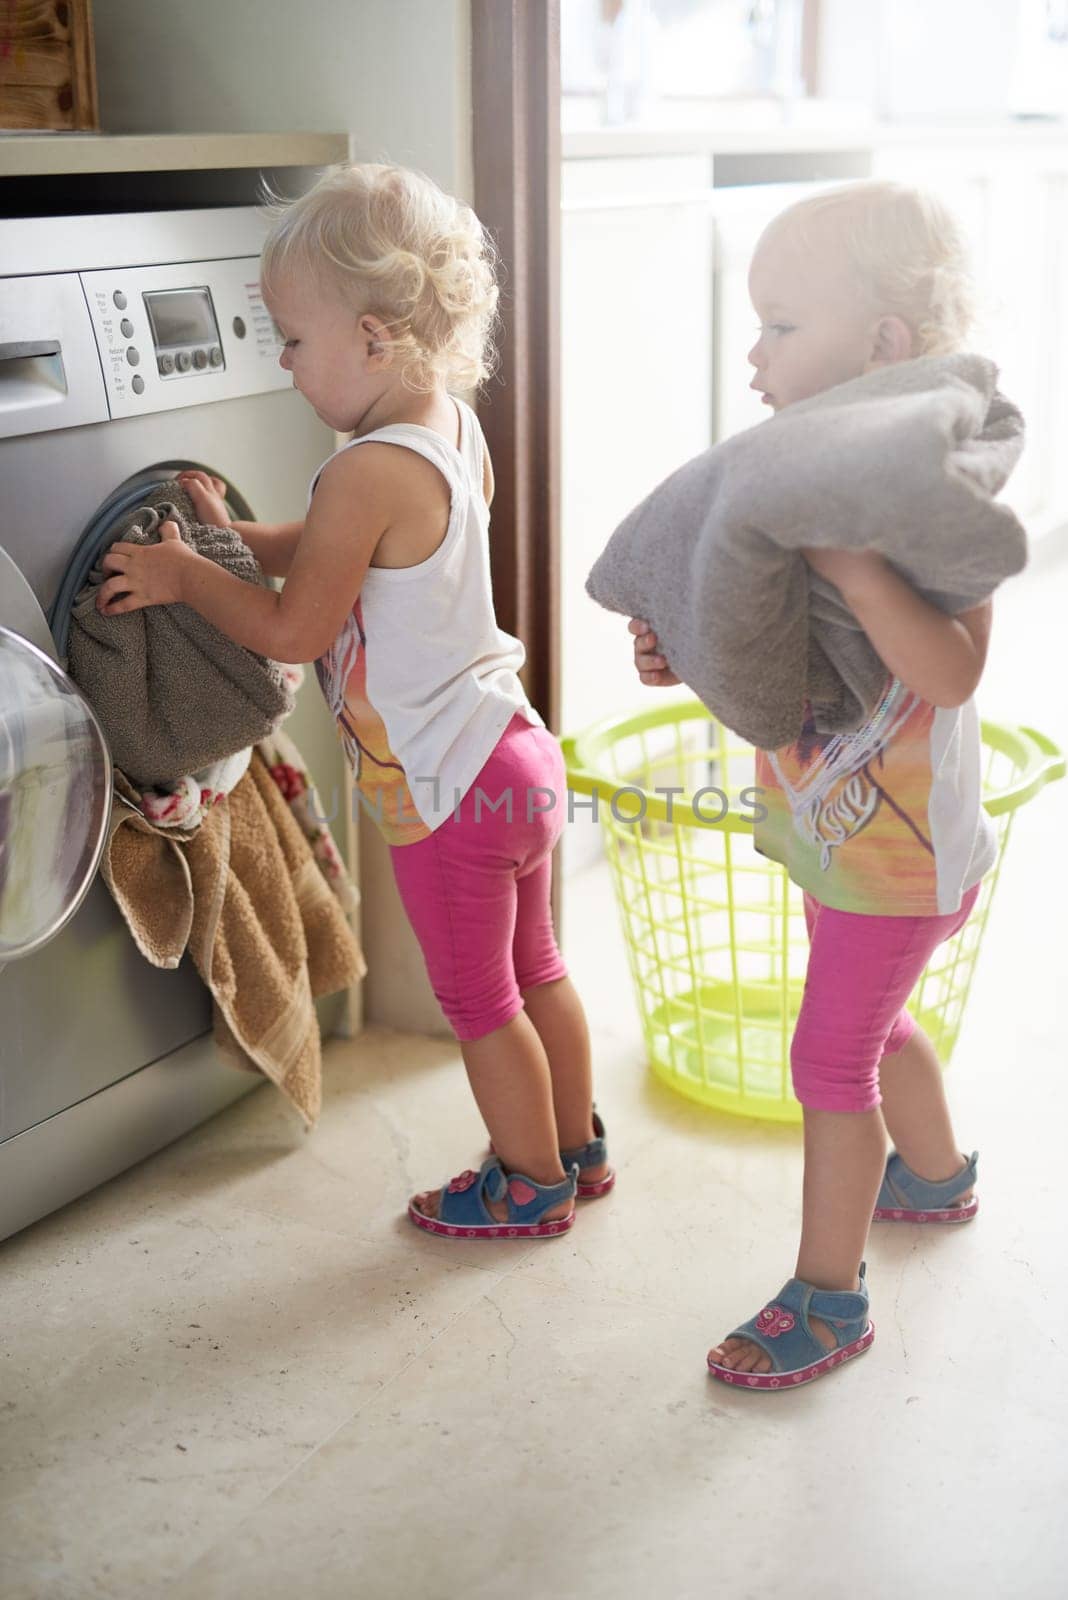 Kids, washing machine and siblings with laundry in house for learning, playing or fun bonding together. Cleaning, games and children help with towels at home for child development, housework or chore.